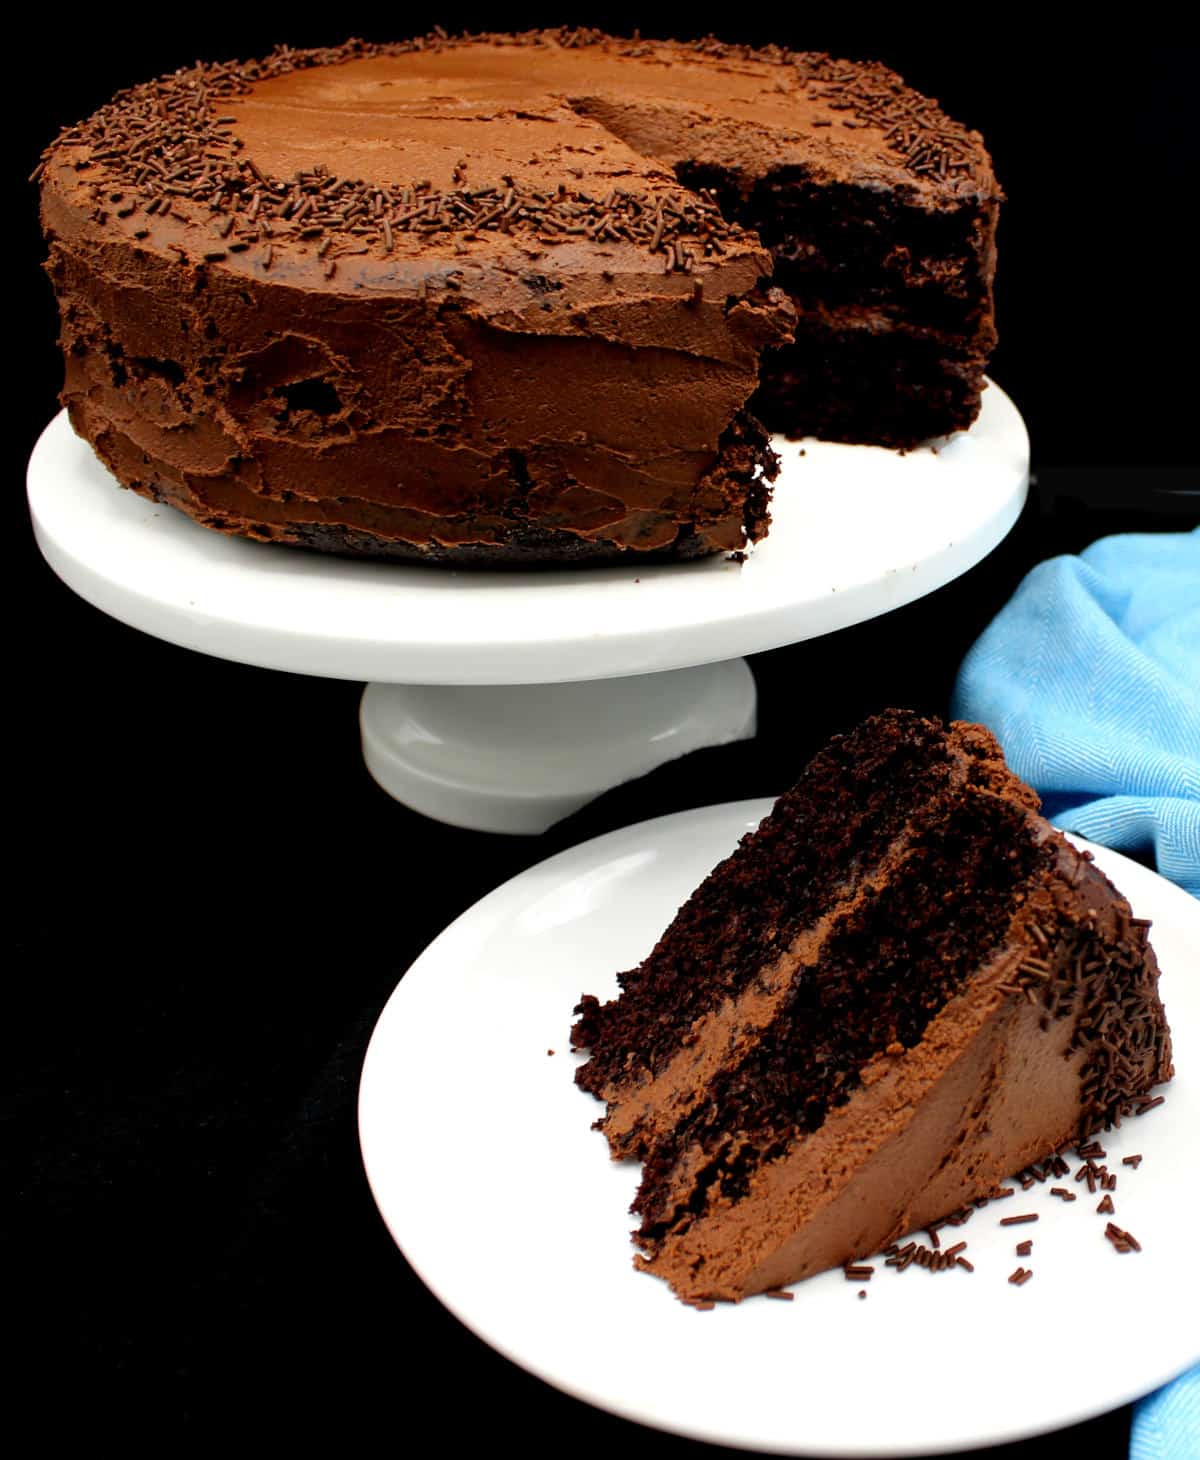 A slice of a vegan chocolate cake on white plate with full cake on cake stand in background.